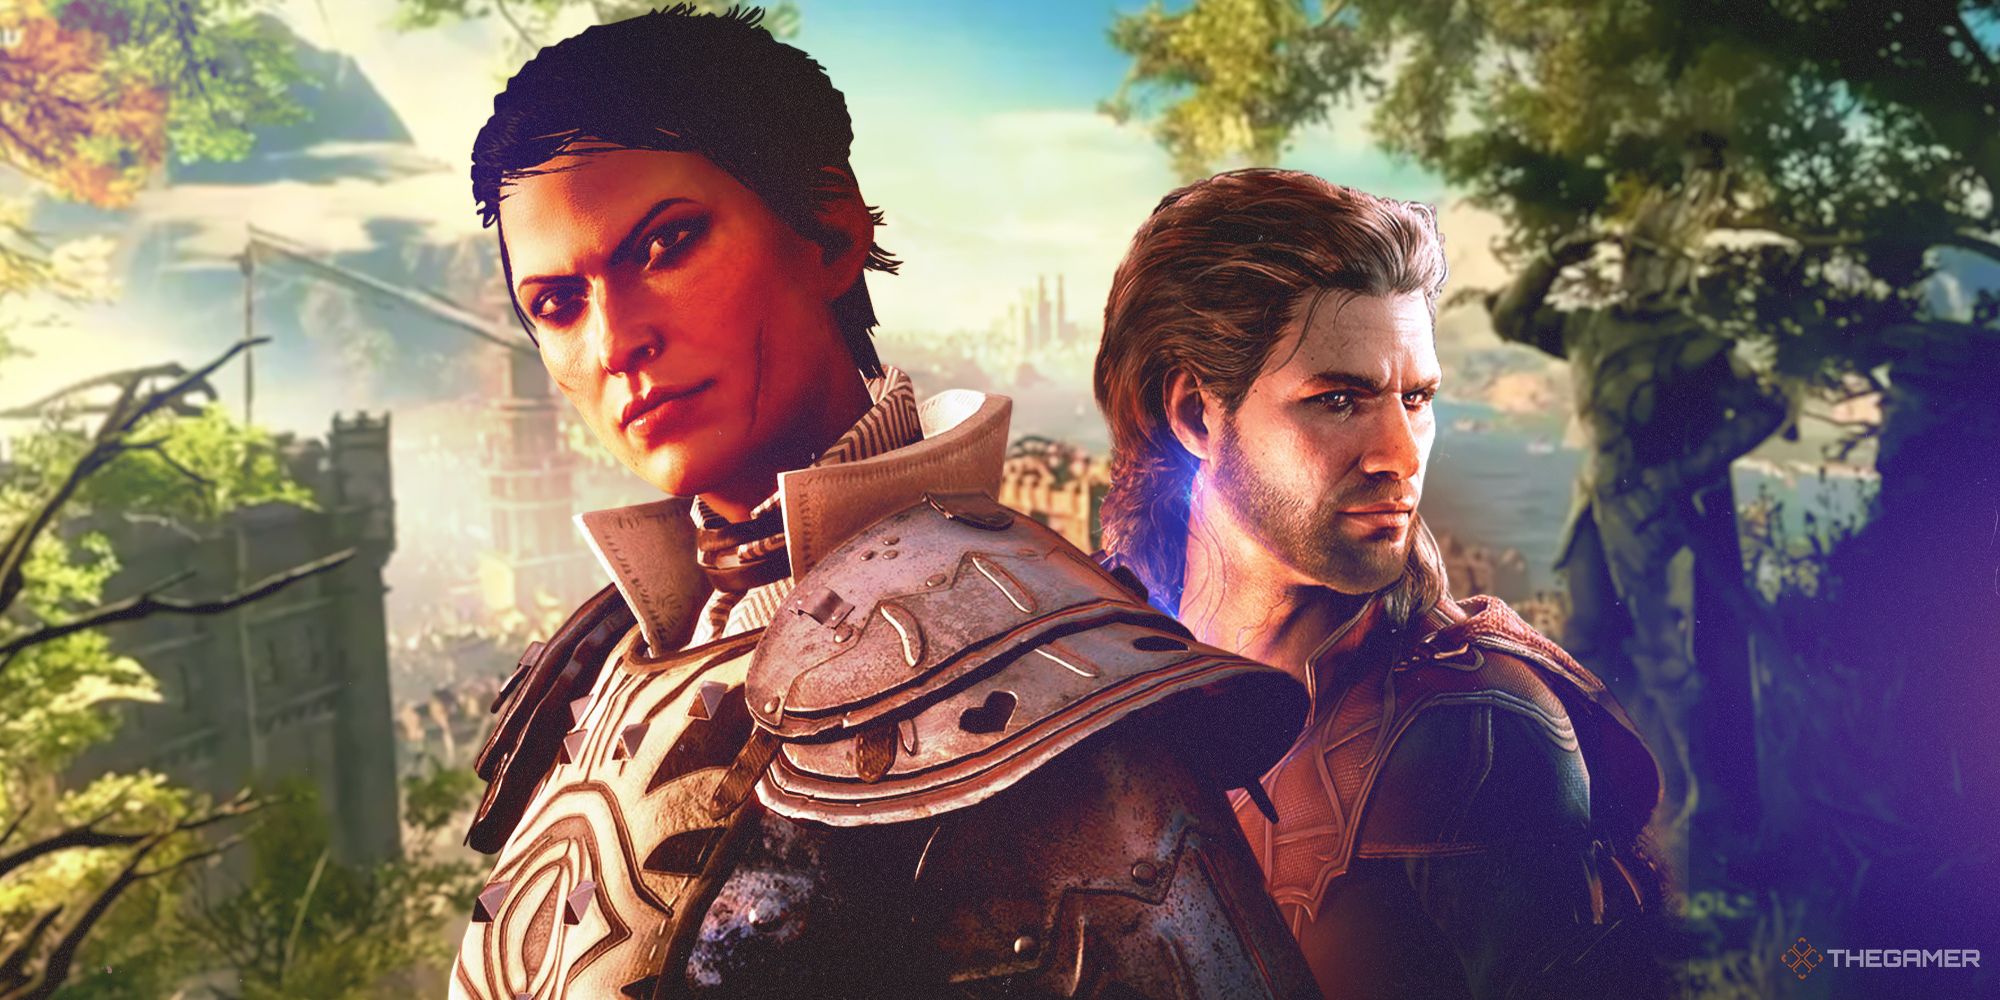 Cassandra from Dragon Age Inquisition next to Gale from Baldur's Gate 3, over a backdrop of Baldur's Gate from a distance